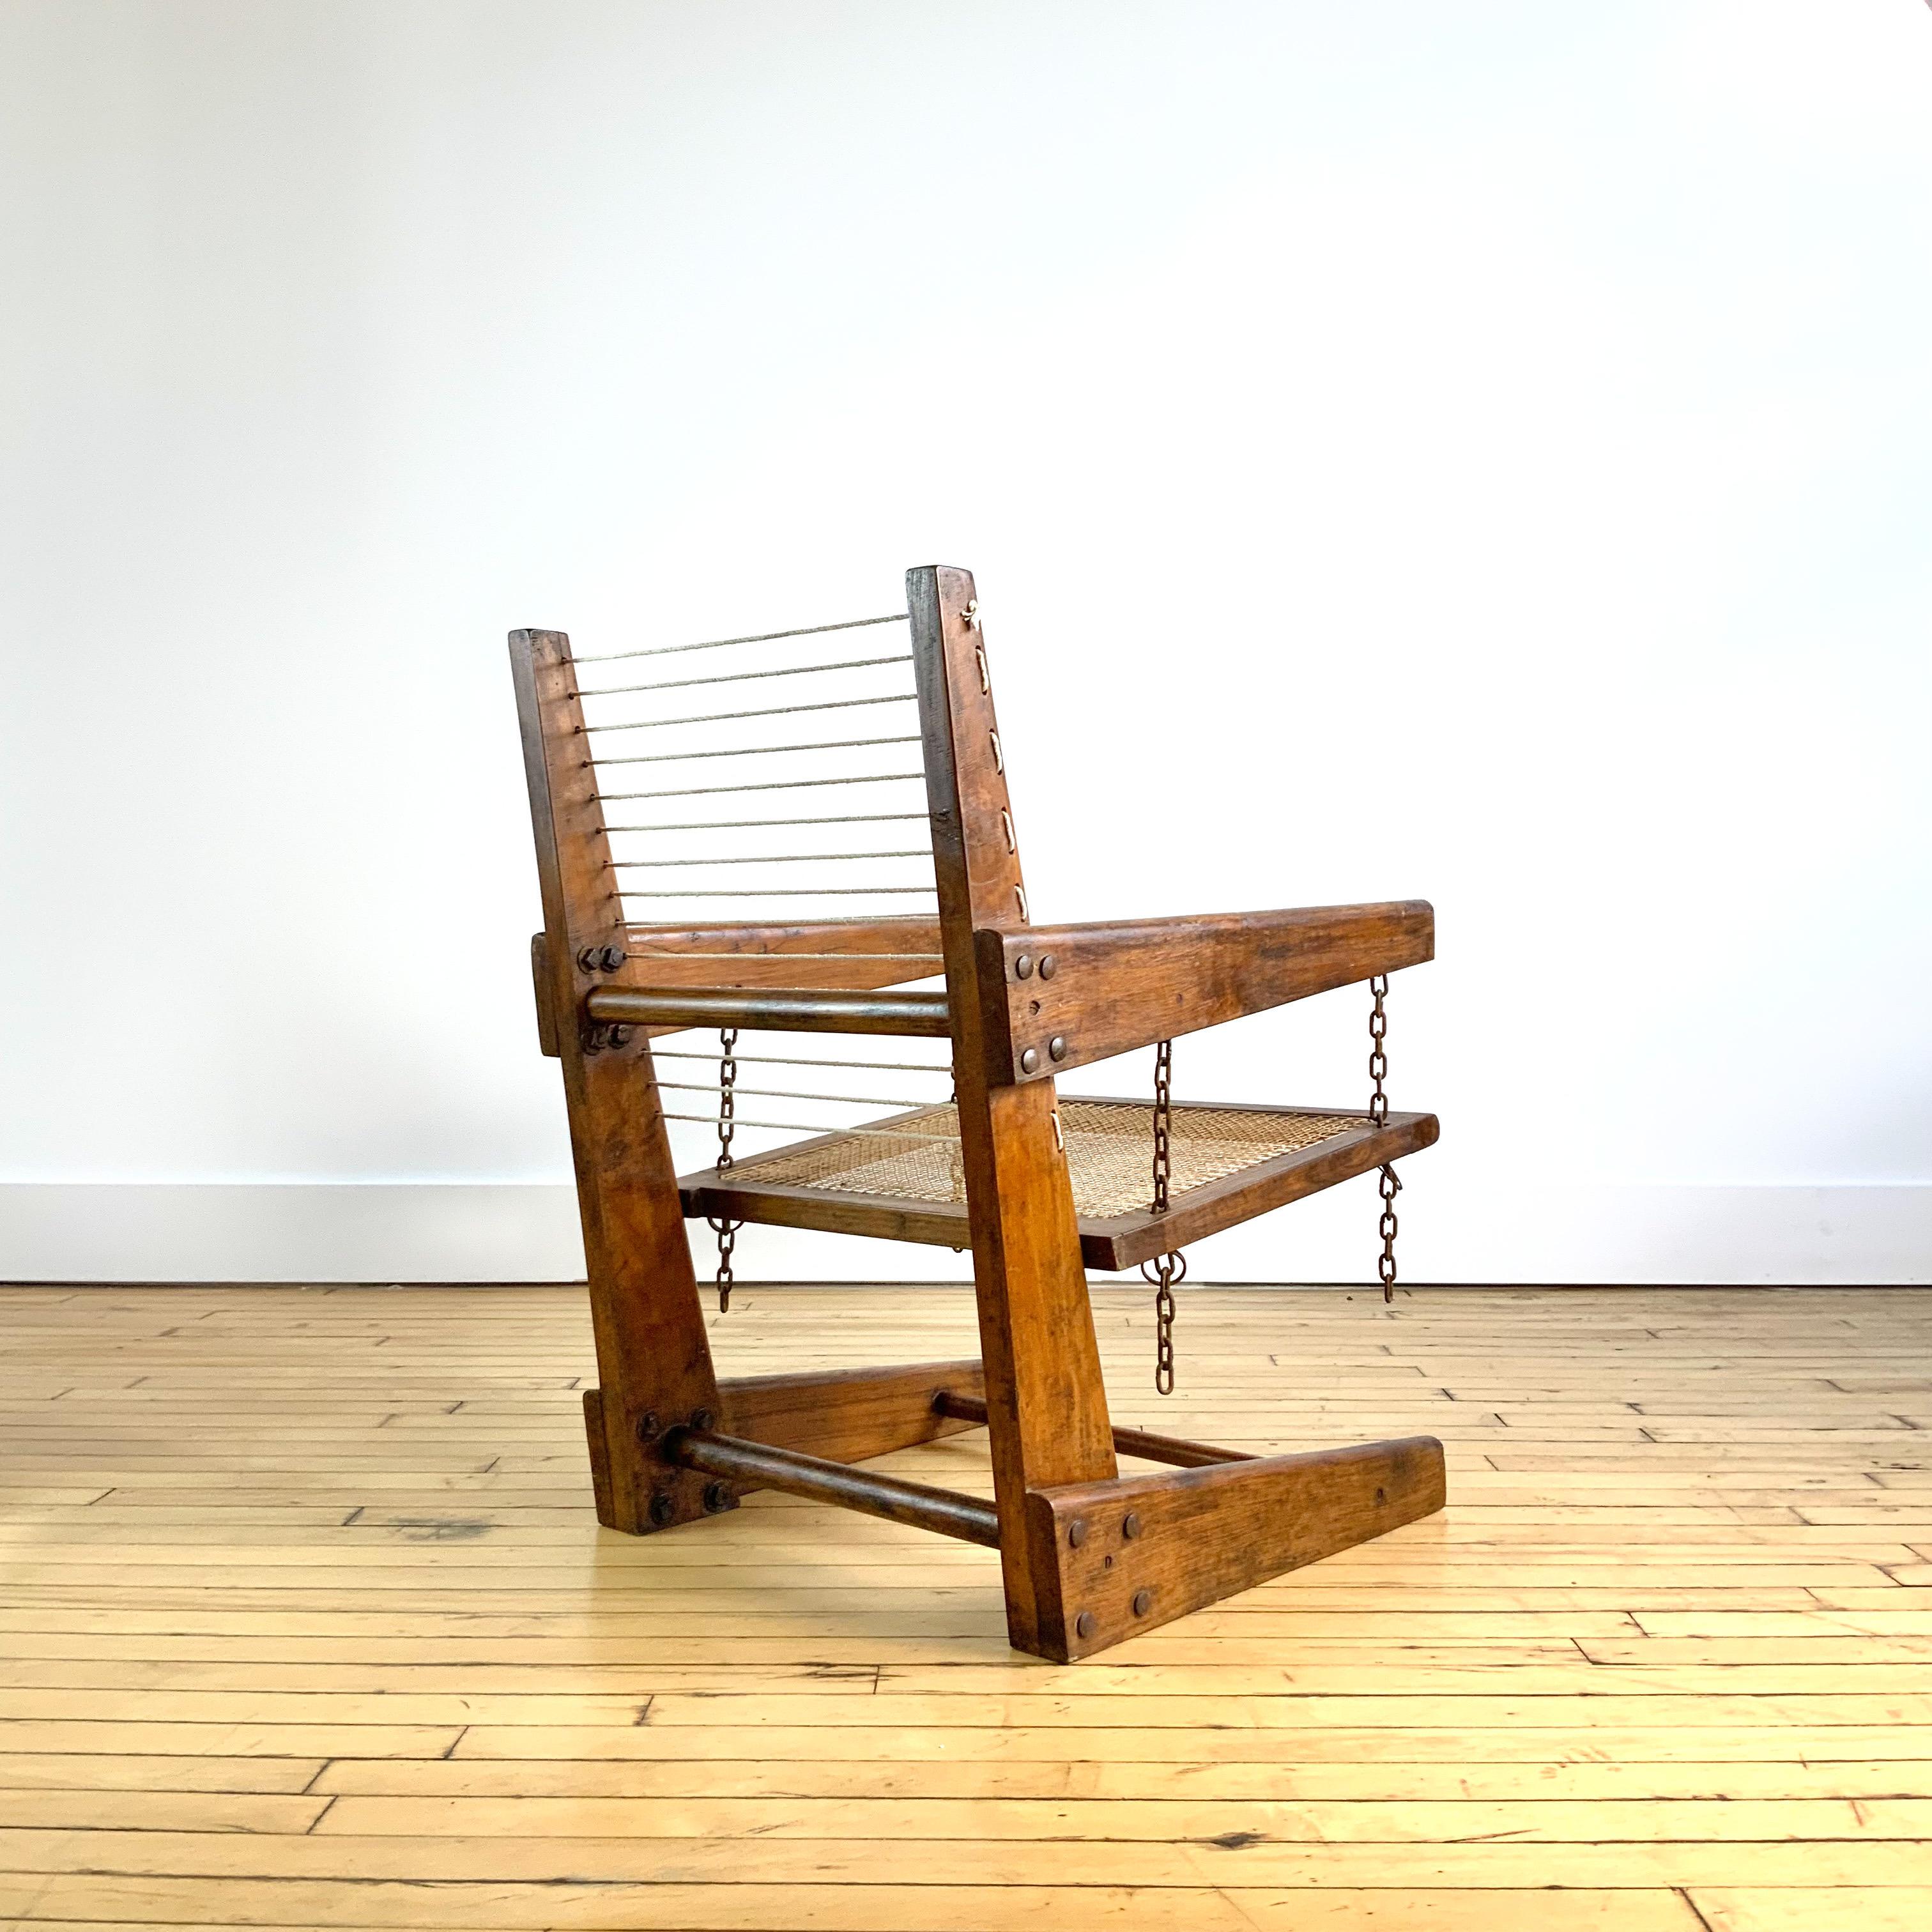 One of the earliest and rarest chairs from the Chandigarh project, model PJ-SI-07-A,

This chair is one of the first creations of Pierre Jeanneret when he arrived in Chandigarh. He used it for himself and for his collaborators. The design is